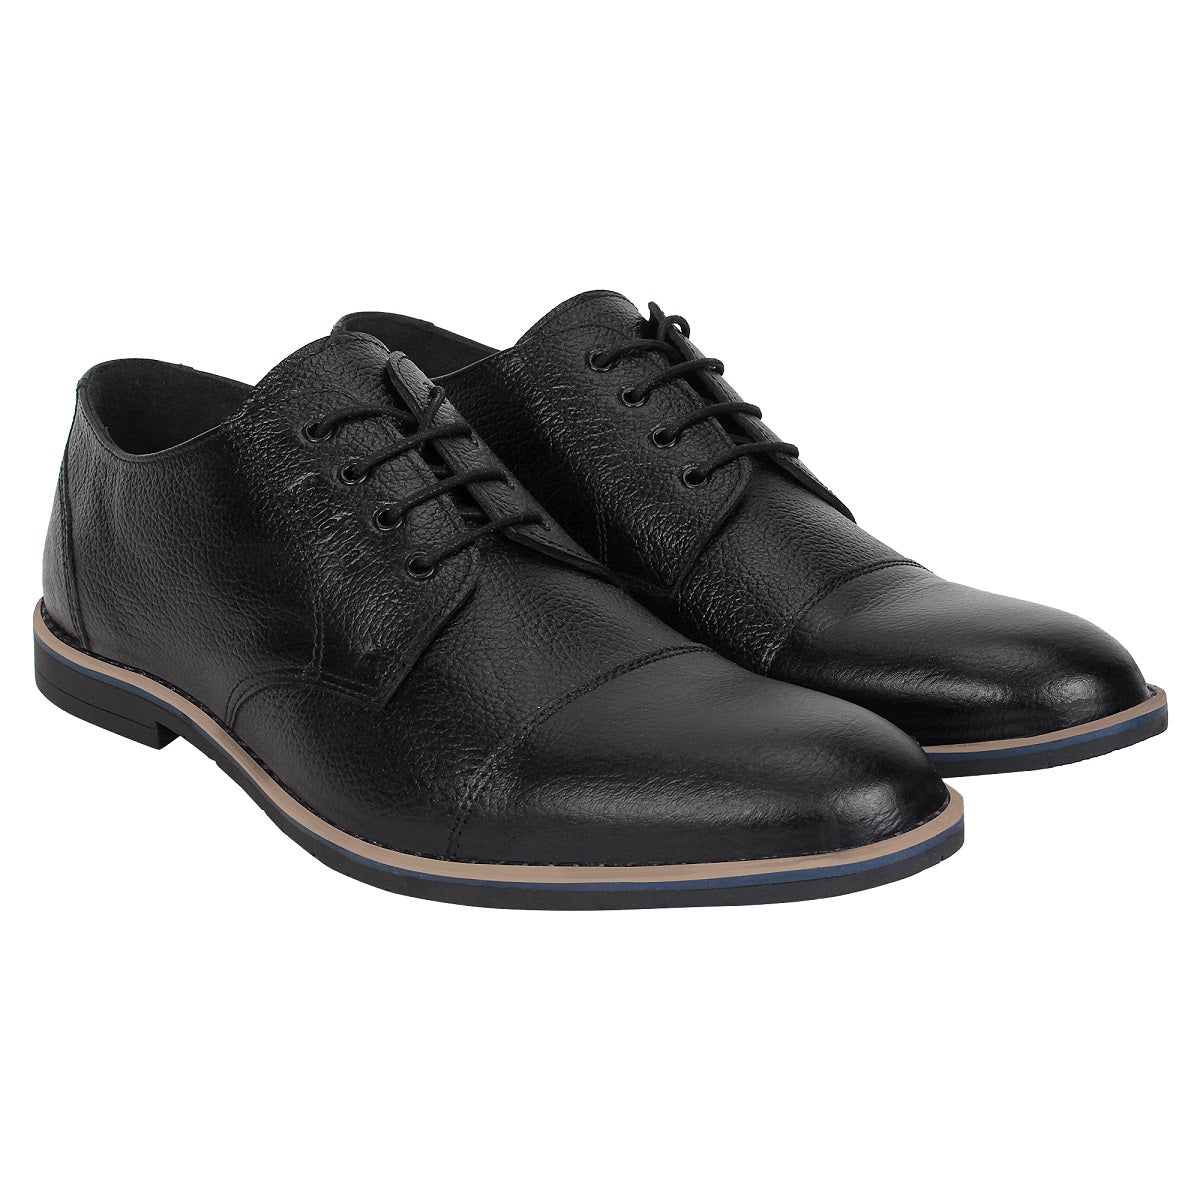 Branded Lace Up Shoes for Men -Used